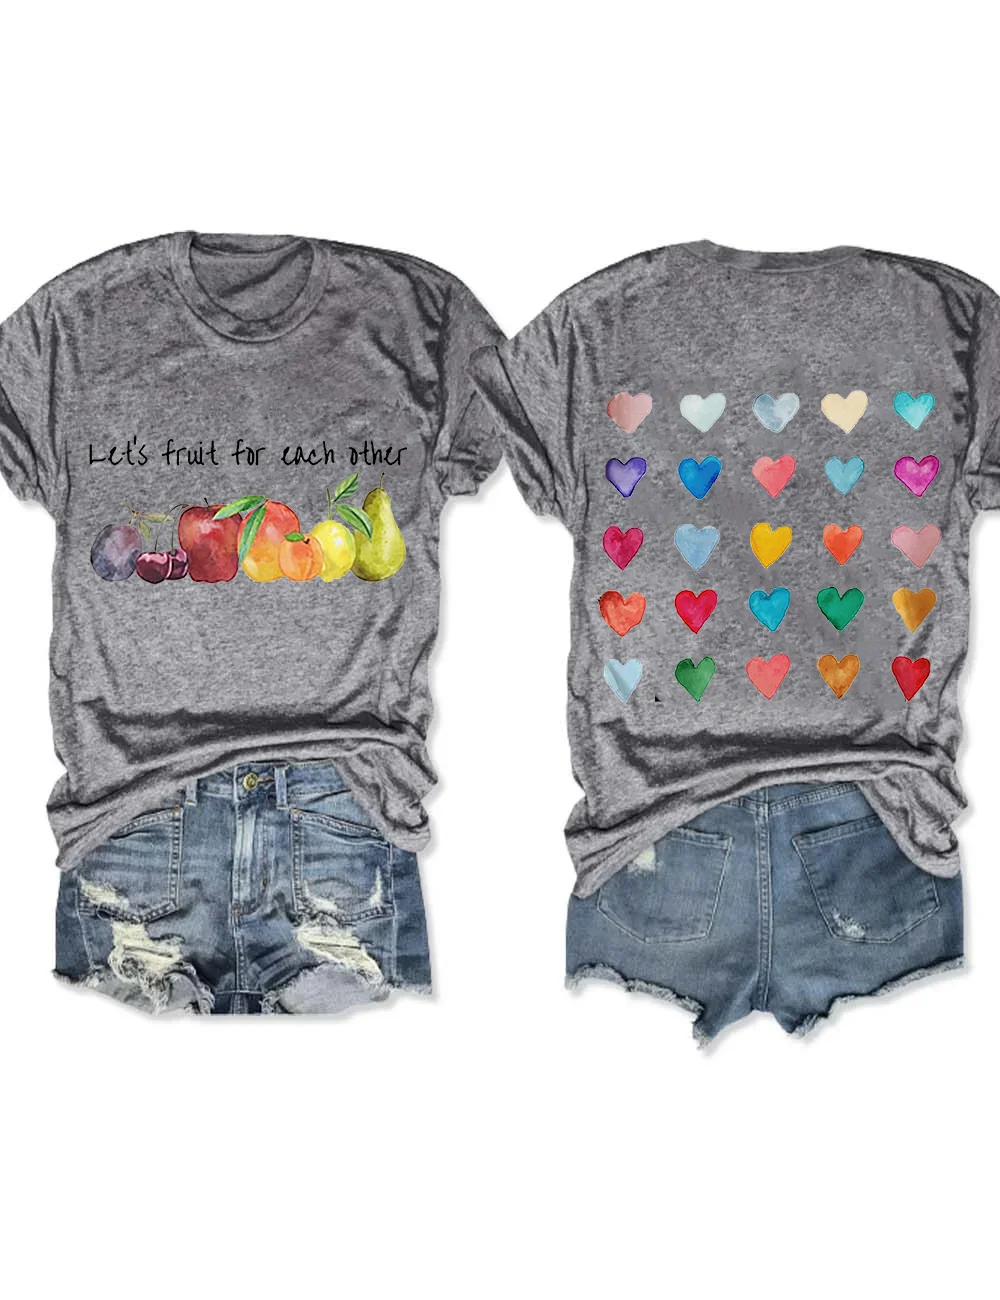 Let's Fruit For Each Other T-shirt